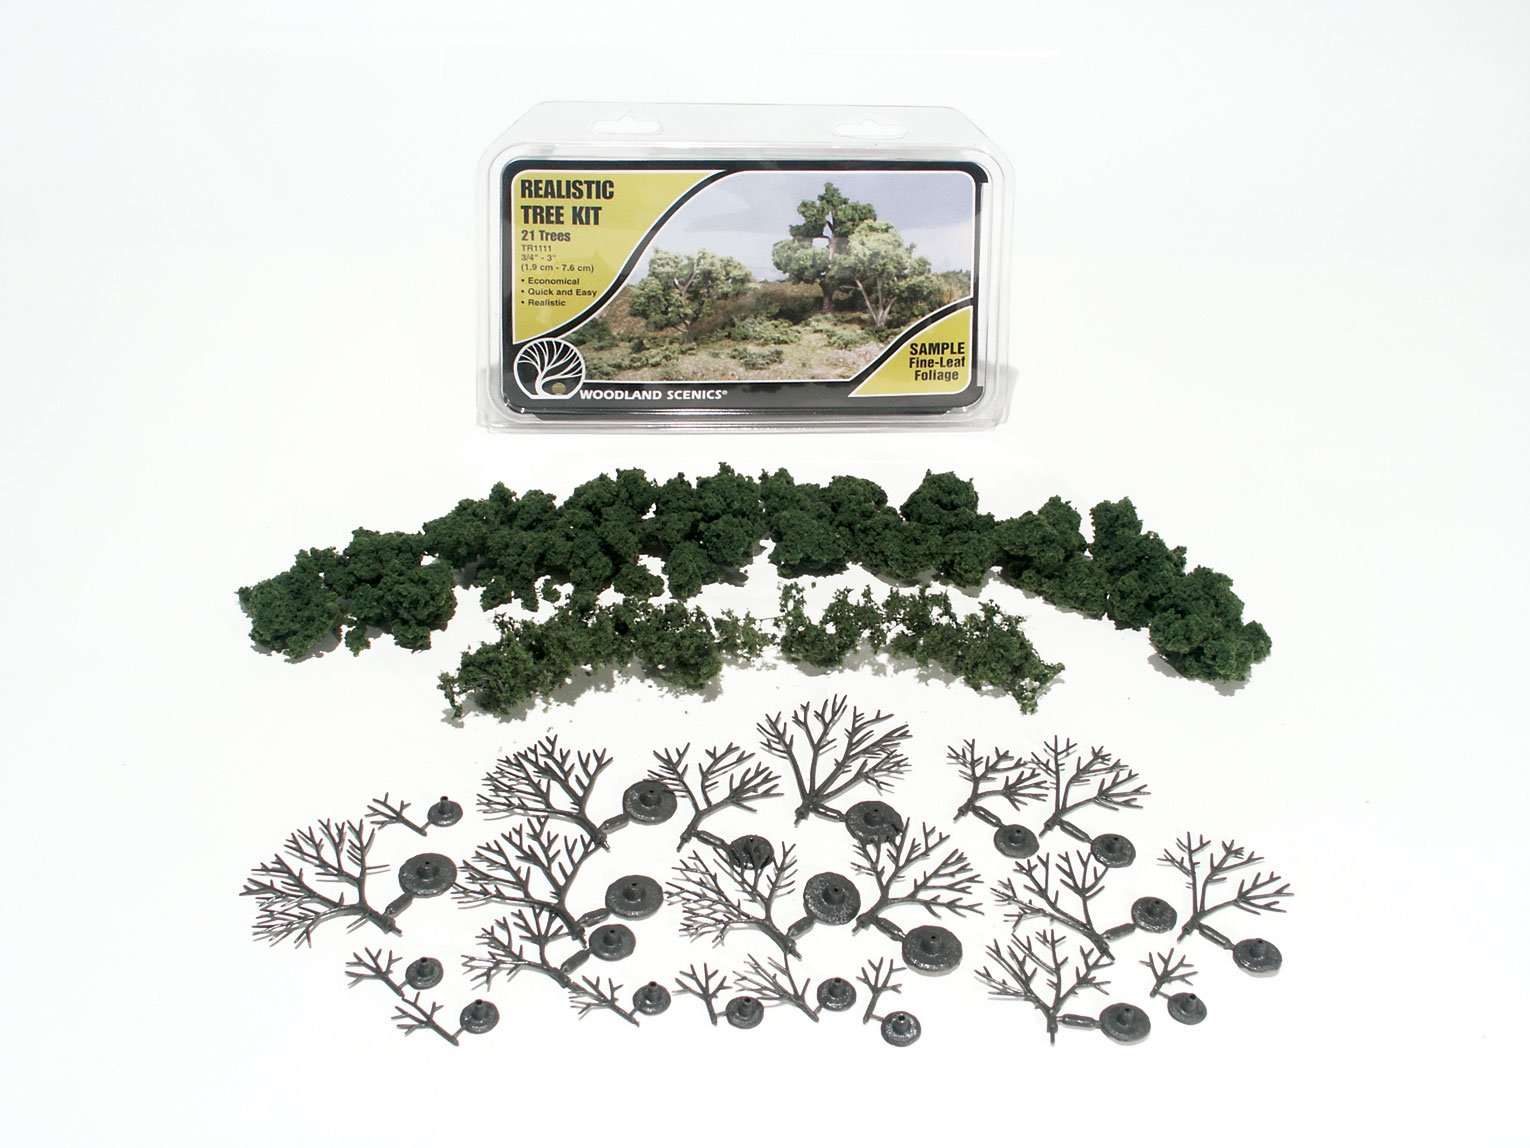 Realistic Tree Kit - Hobby Supplies - The Hooded Goblin